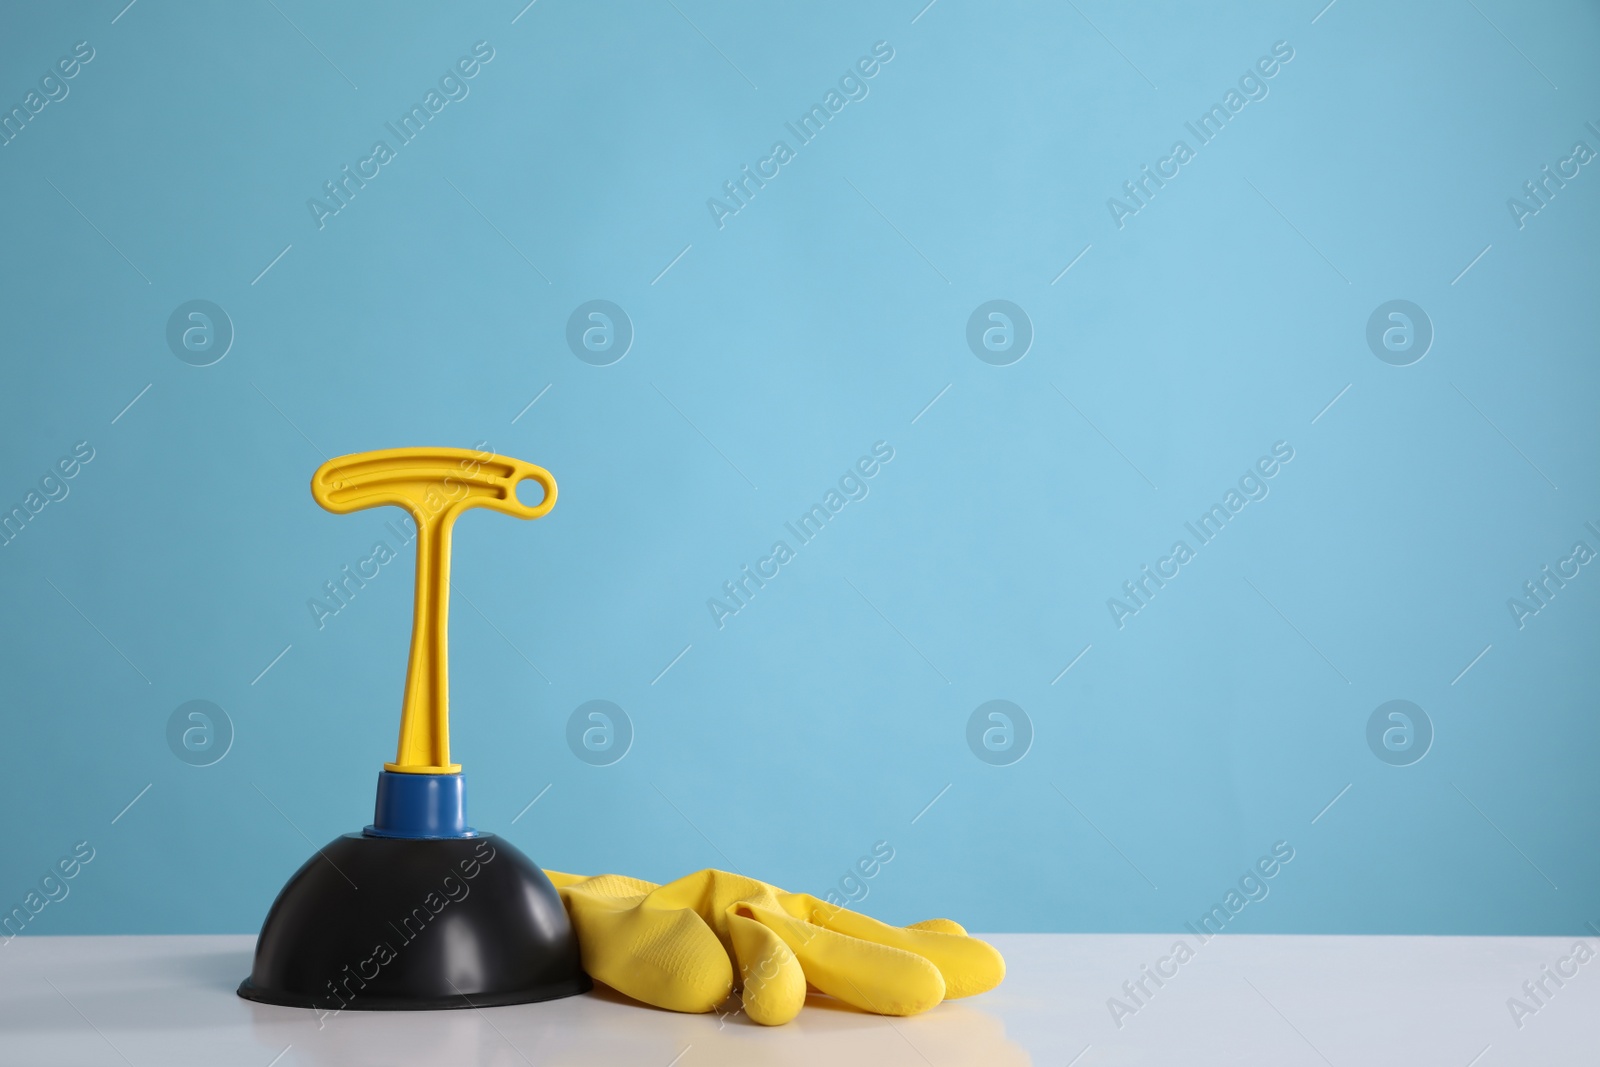 Photo of Plunger and rubber glove on white table against turquoise background. Space for text